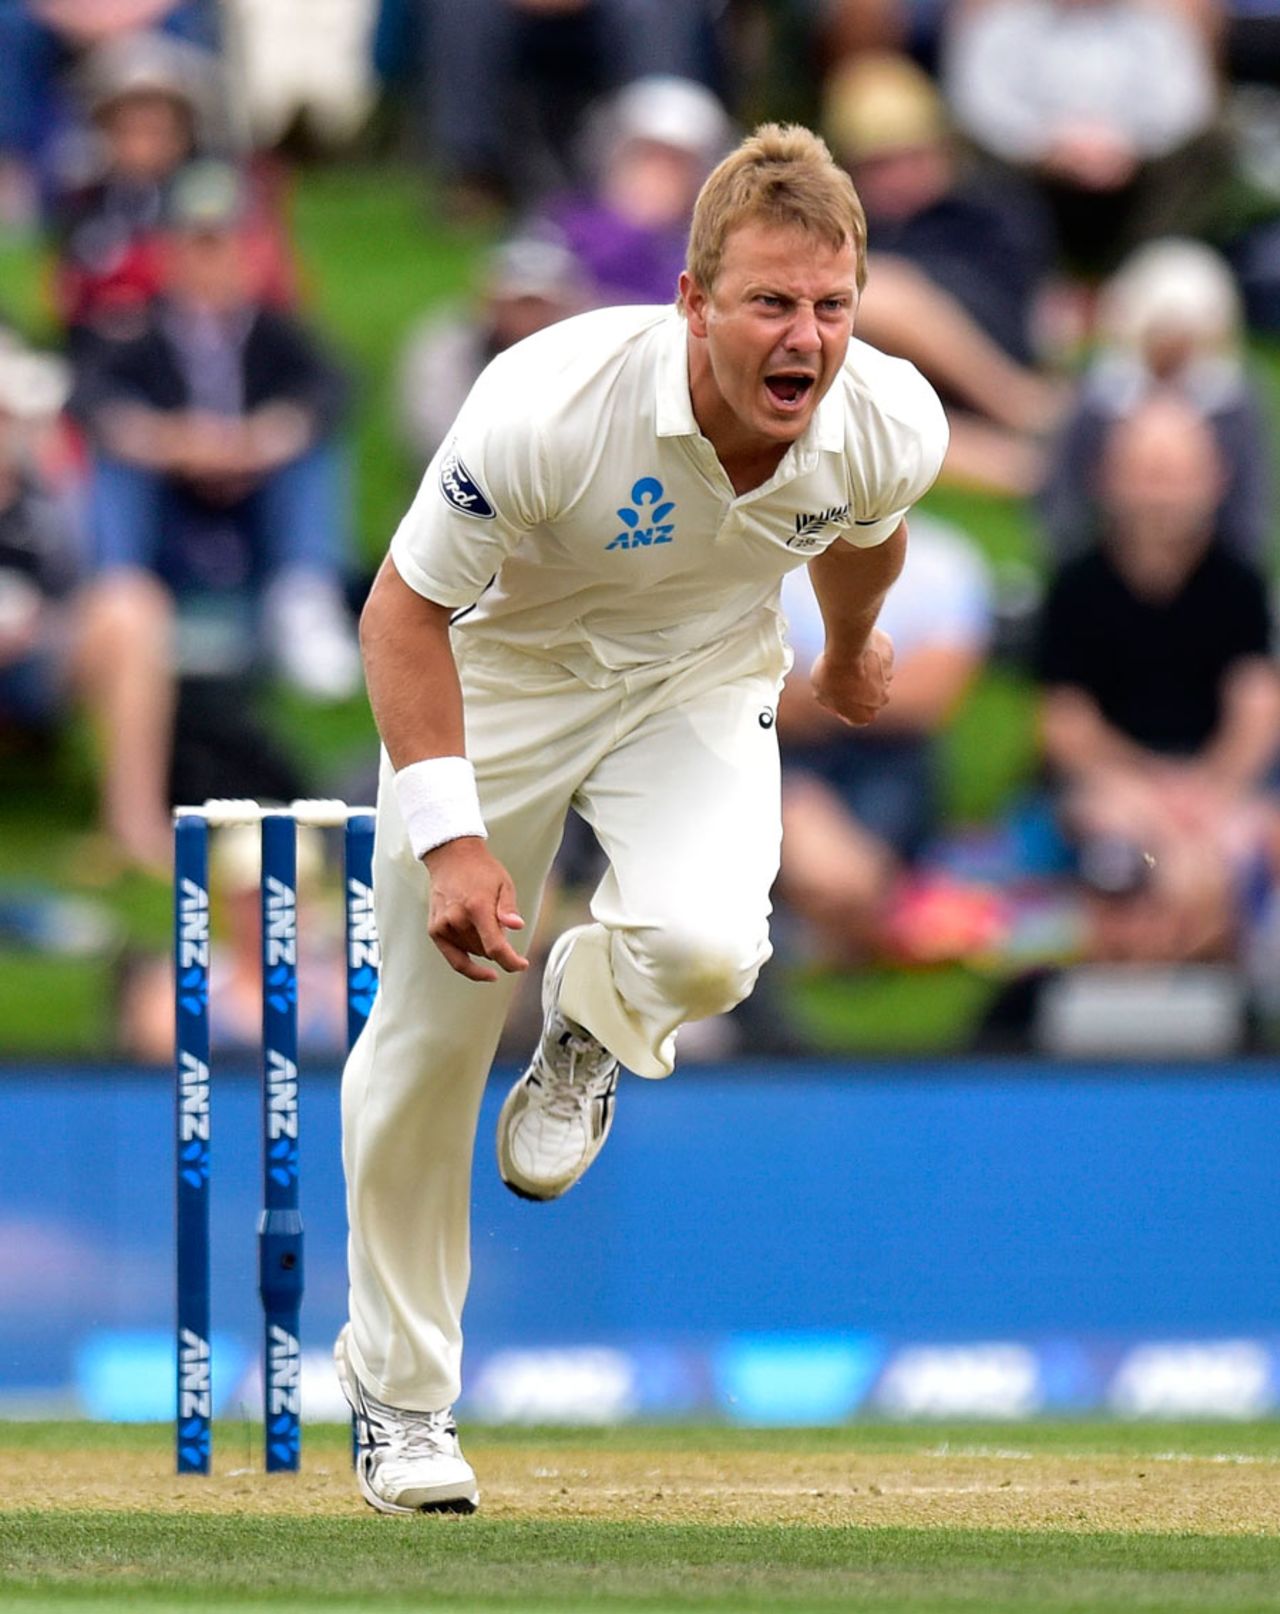 Neil Wagner in his follow-through, New Zealand v Australia, 2nd Test, Christchurch, 3rd day, February 22, 2016